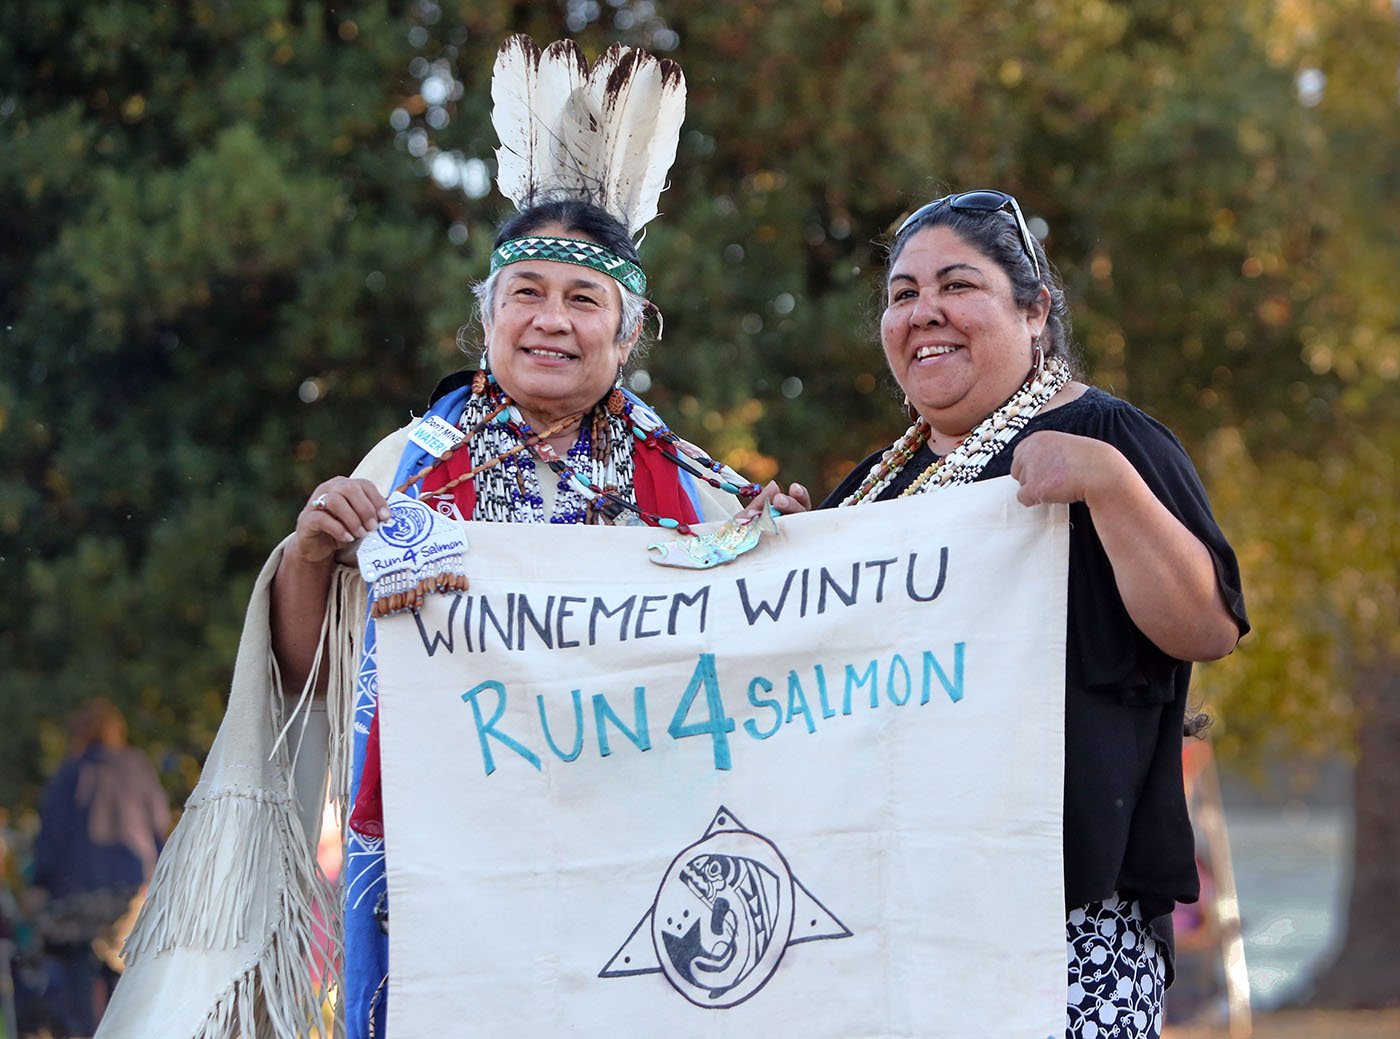  Vallejo, CA — Winnemem Wintu Chief Caleen Sisk and Corrina Gould, spokesperson for the Confederated Villages of Lisjan Ohlone, join together to kick off the Run4Salmon.  The ceremony opens at Sogorea Te’, a sacred gathering place and former indigeno